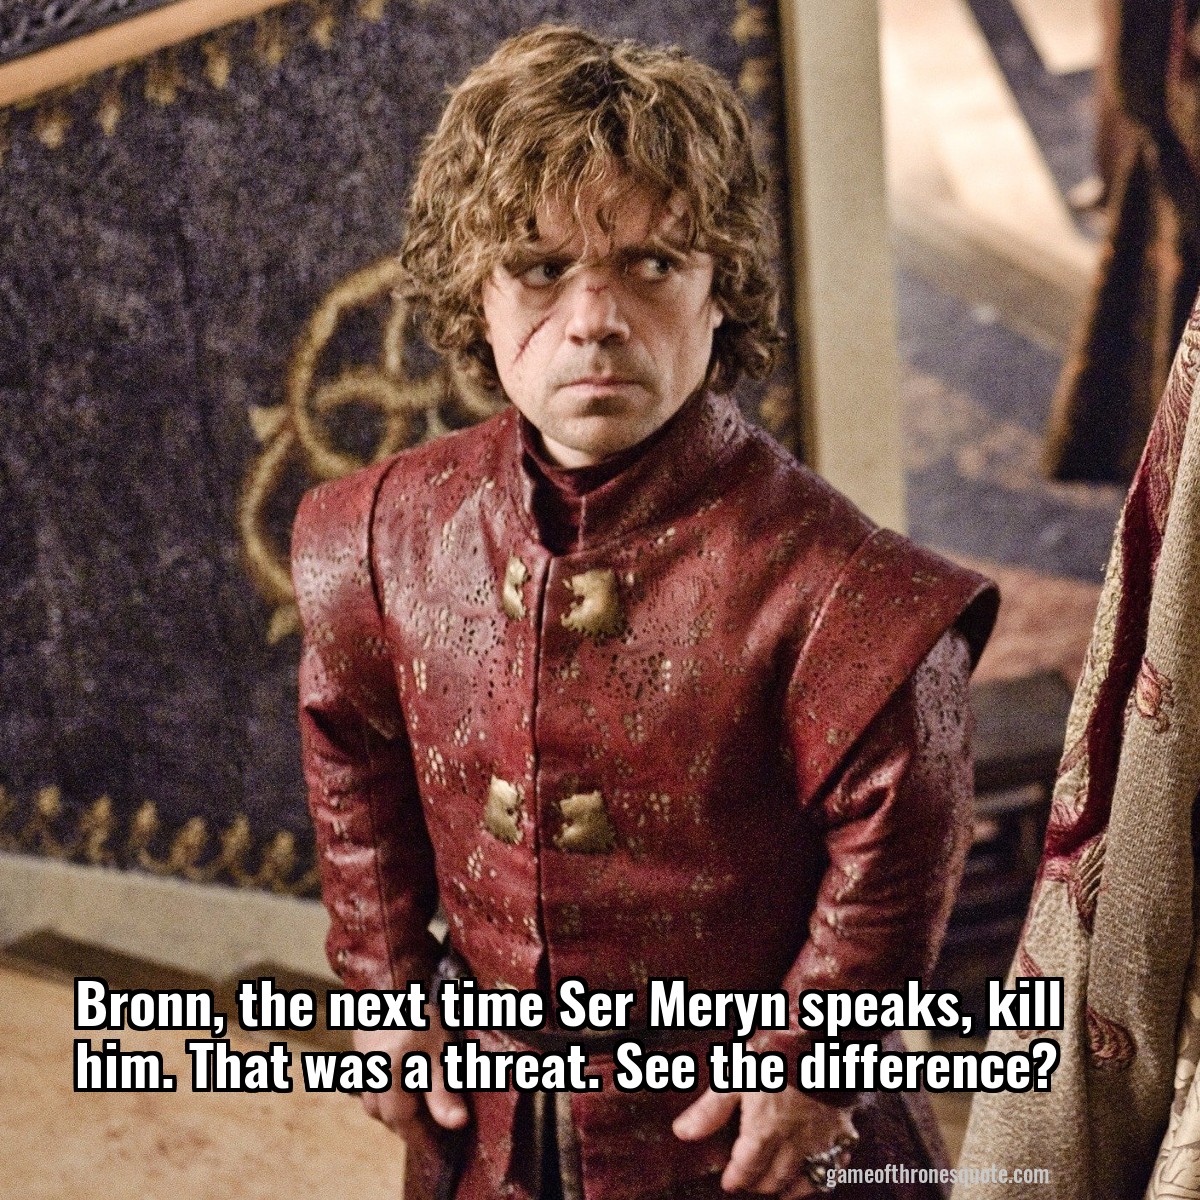 Bronn, the next time Ser Meryn speaks, kill him. That was a threat. See the difference?